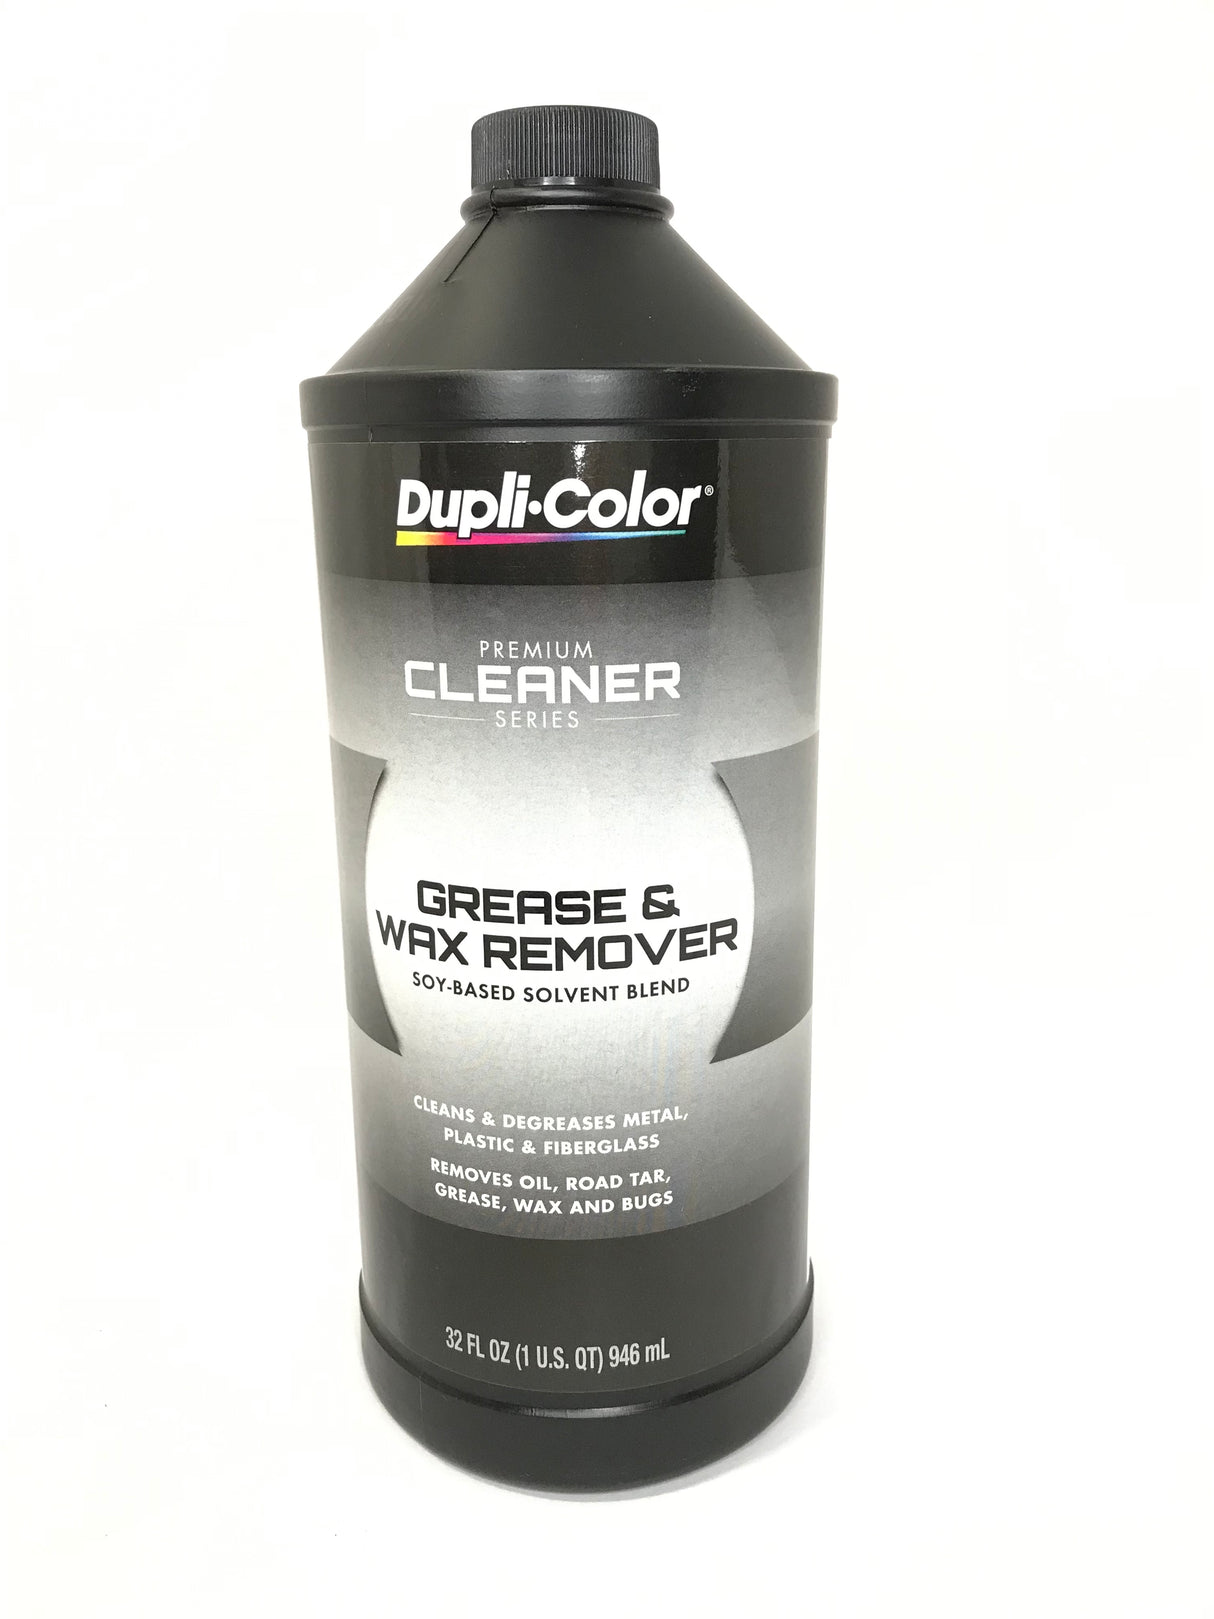 DUPLICOLOR CM543 Soy Based Solvent Blend Grease and Wax Remover -1 quart